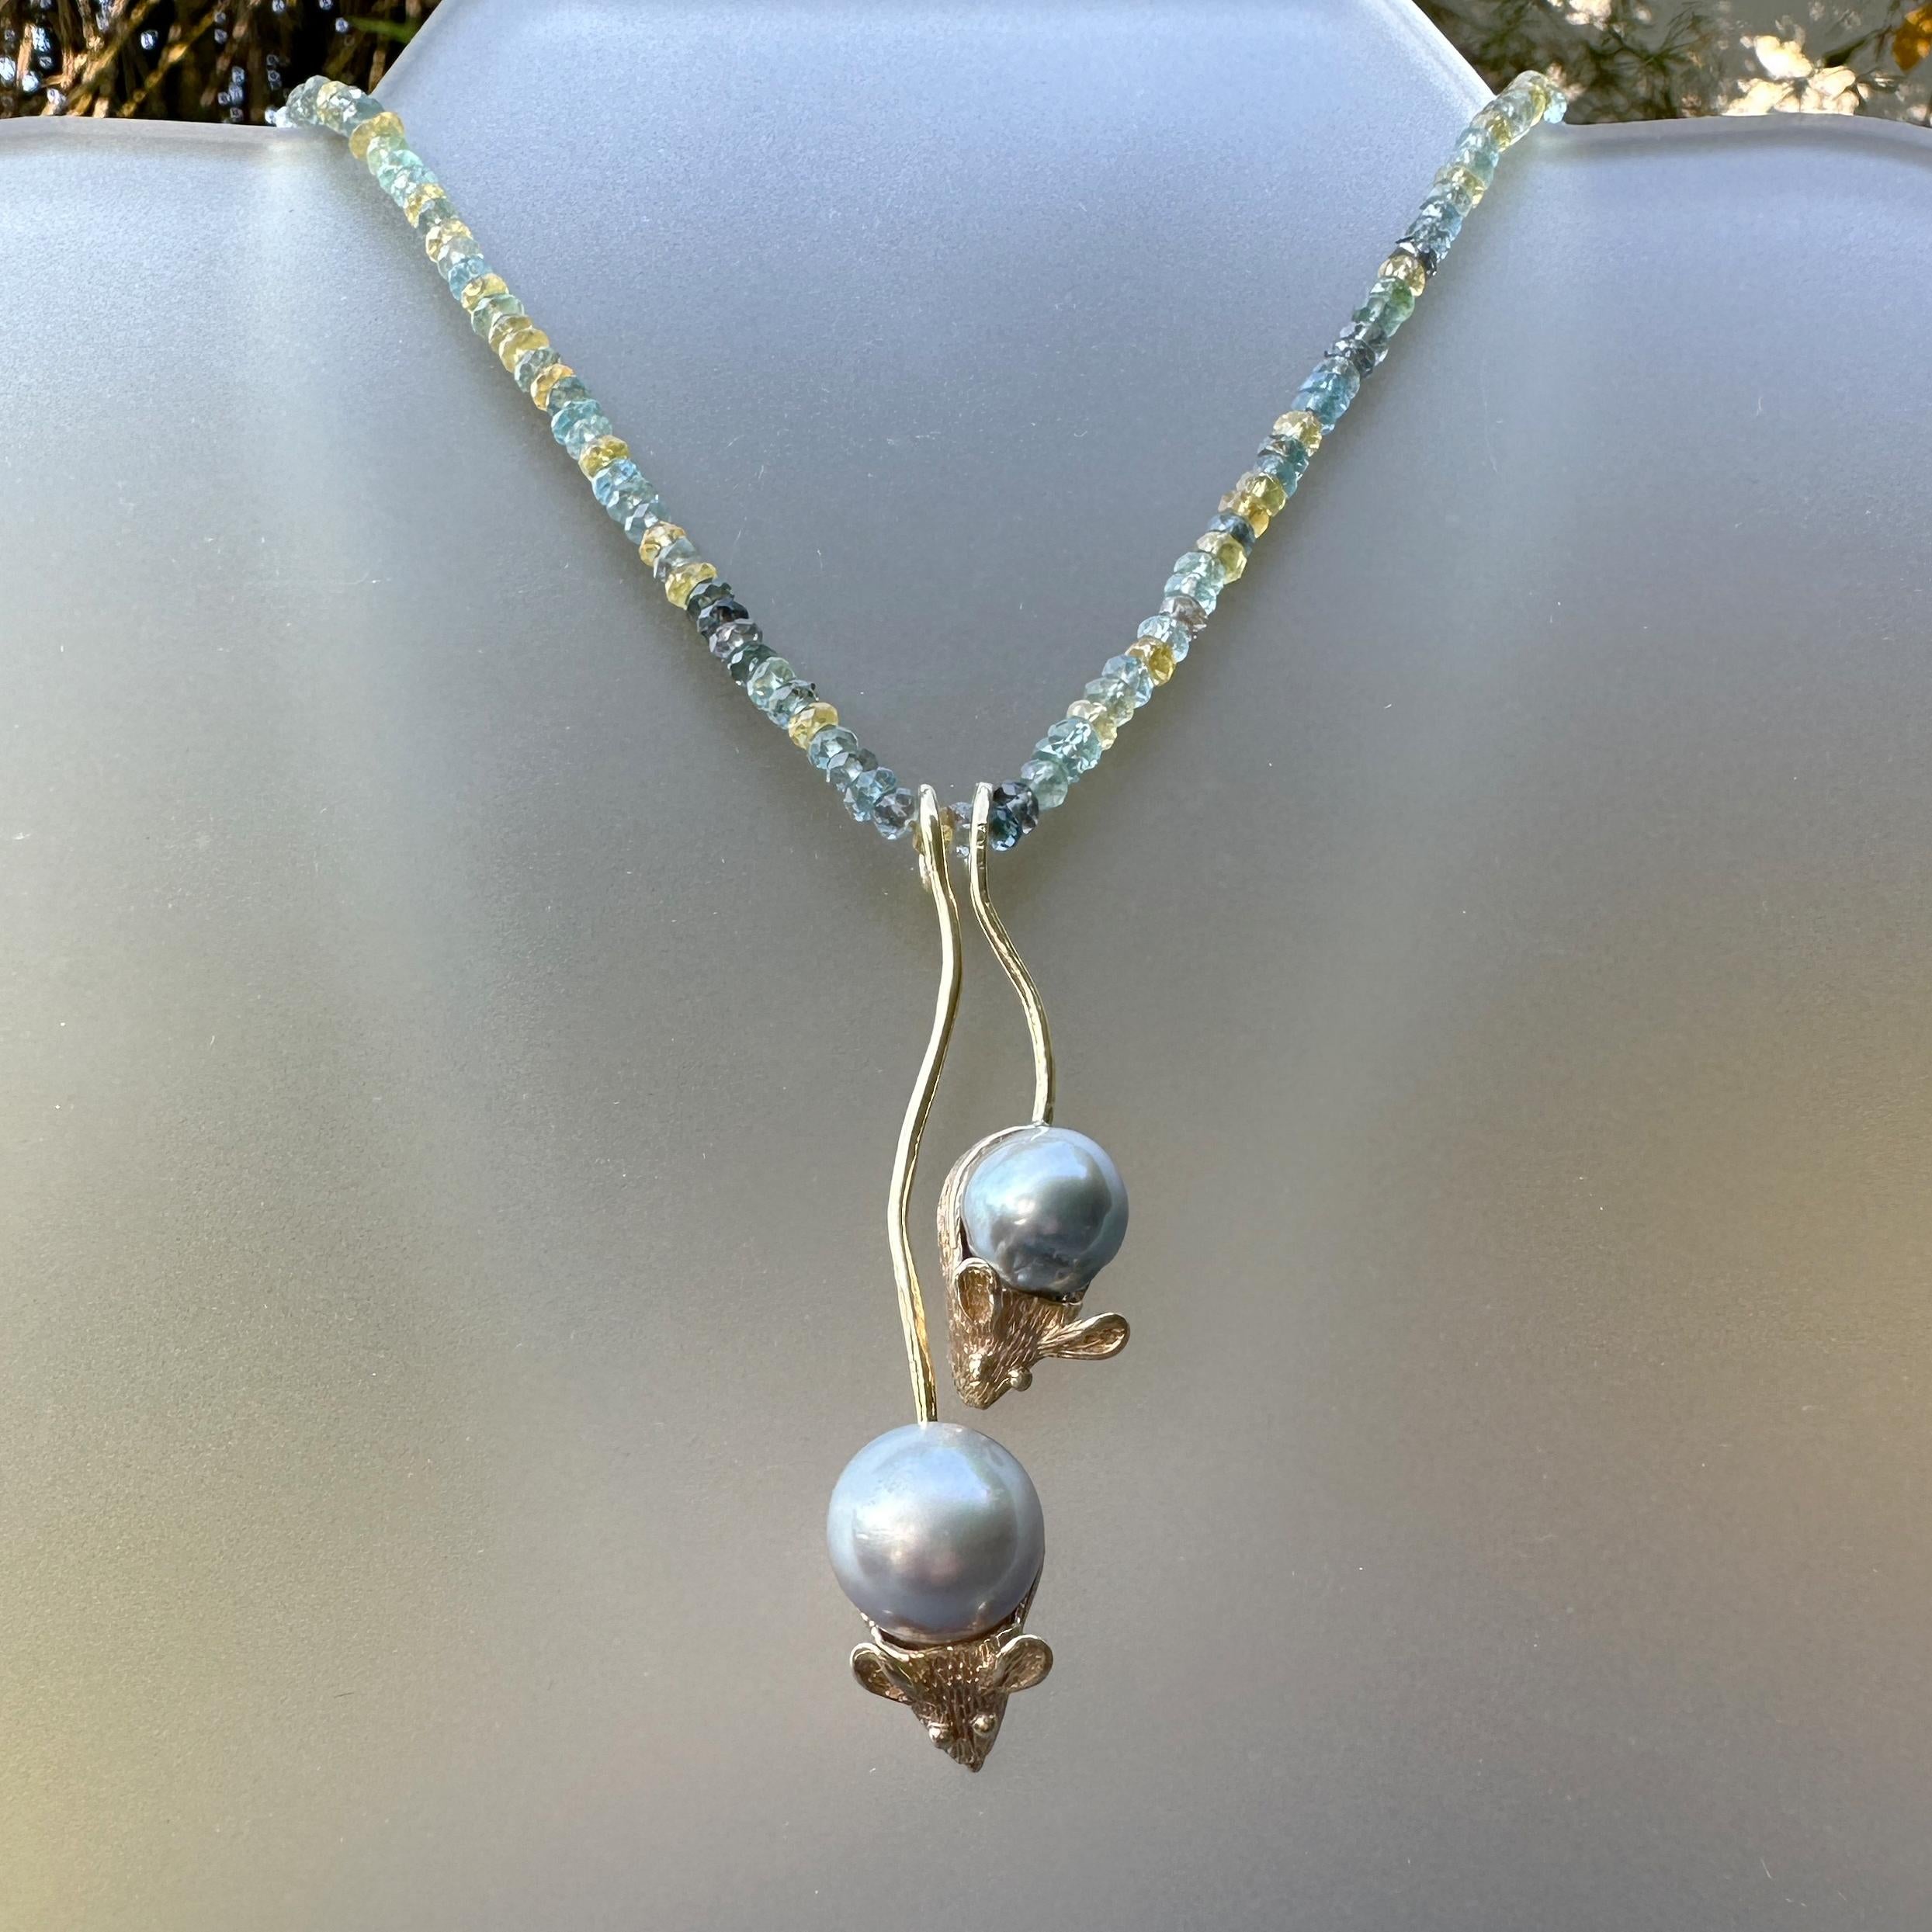 Two fat little mice in 14 karat yellow gold with silver-blue Tahitian pearl bodies hang happily by their tails from a string of sparkling aquamarine beads.

These mice are based on an antique silver charm that  we've had in the store for a while. 